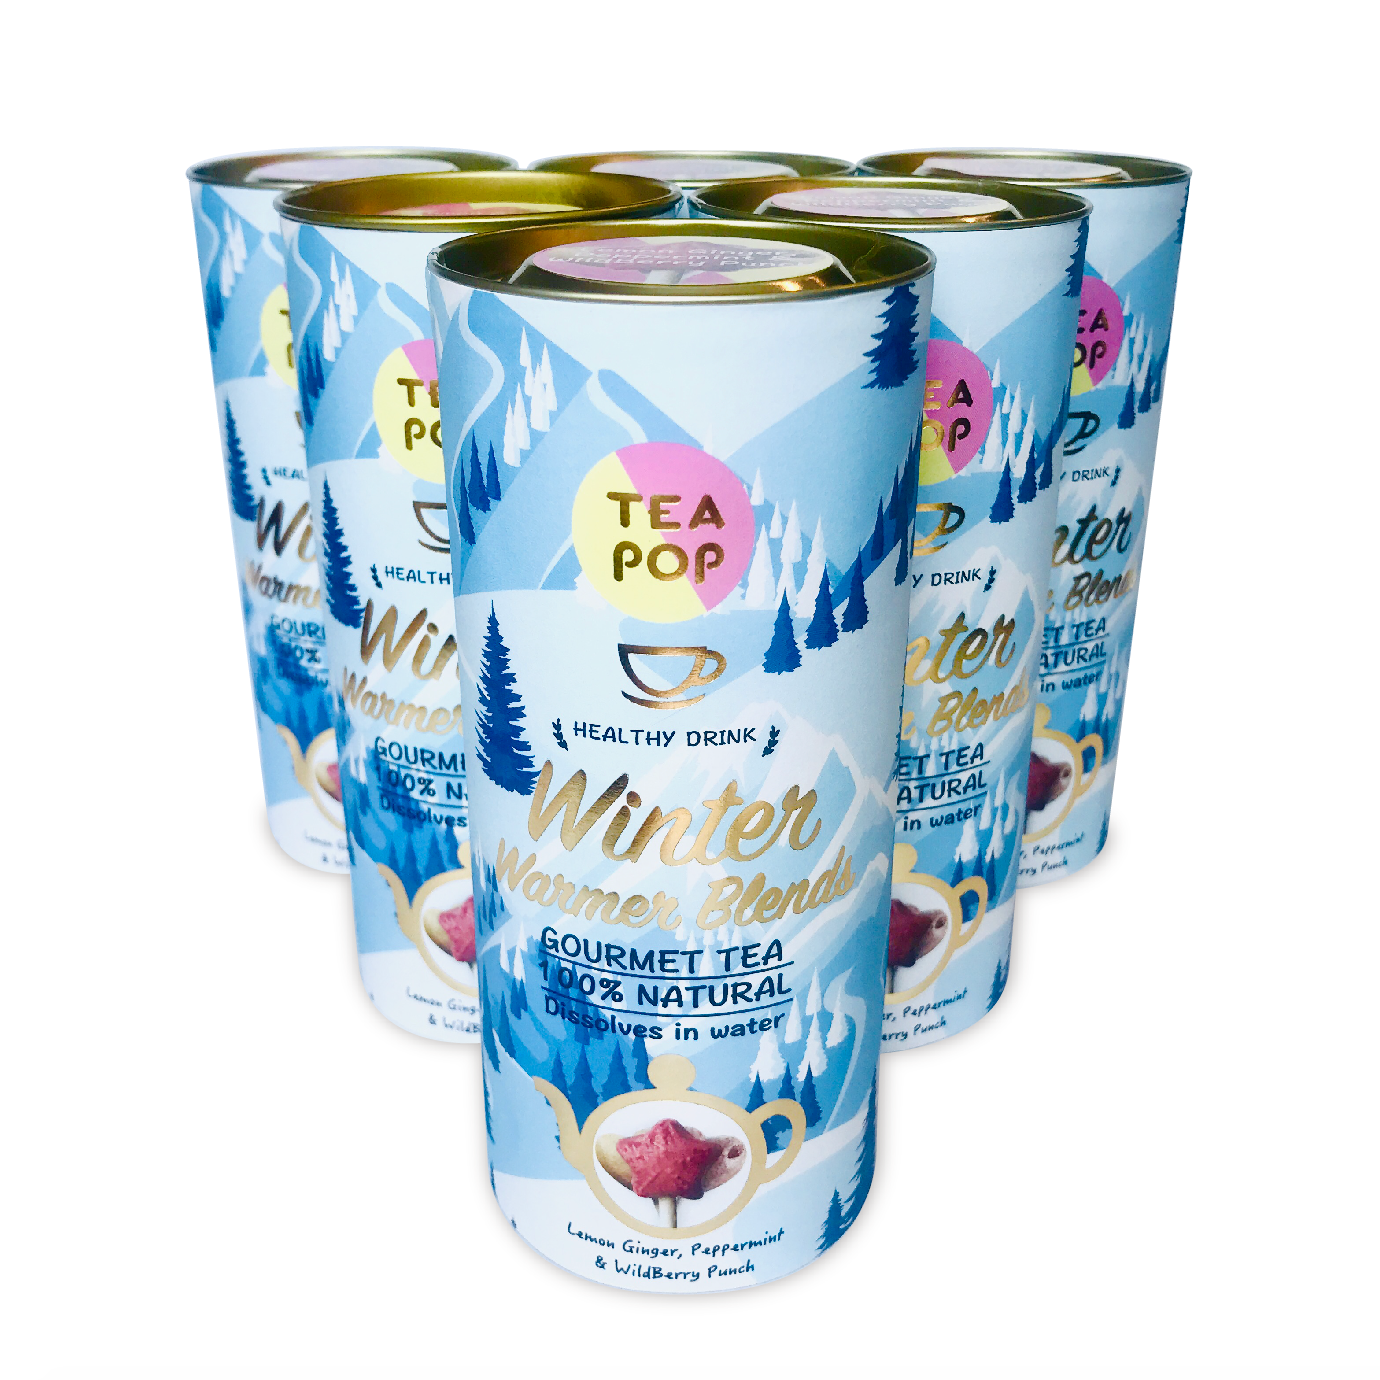 Winter Warmer TEA On-A-Stick! / Assorted Blends / Wholesale Price